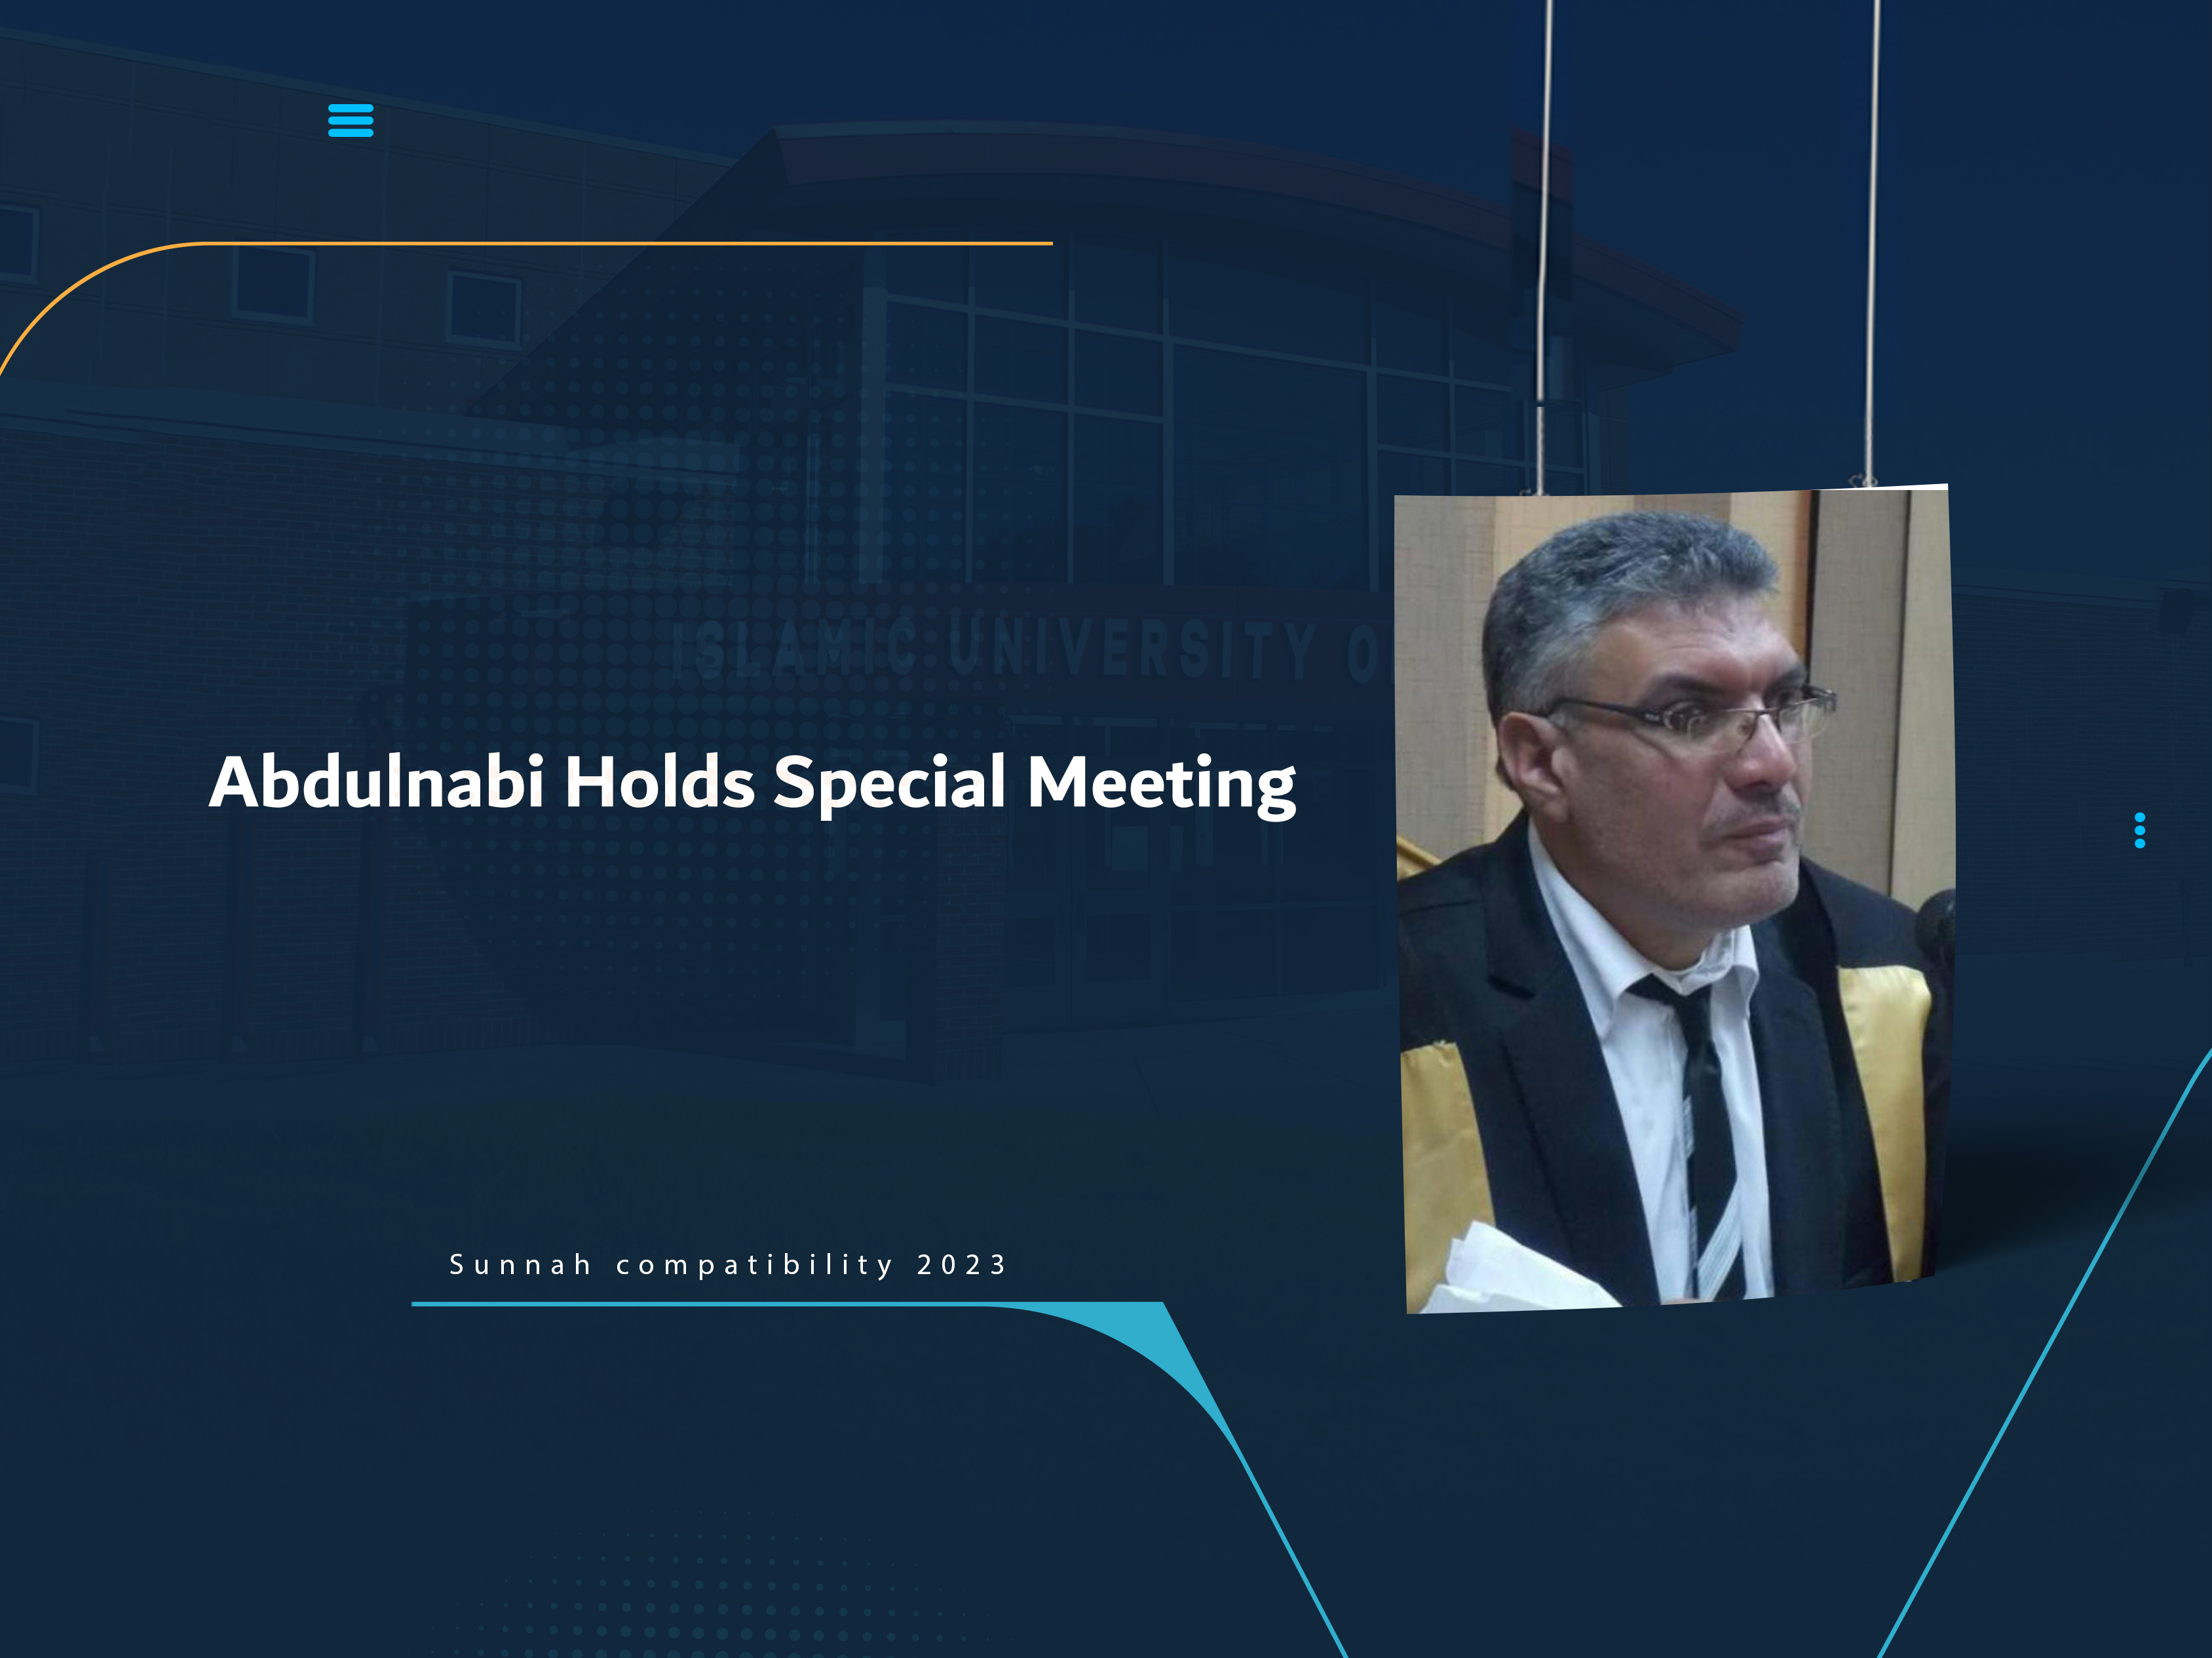 Abdulnabi Holds Special Meeting